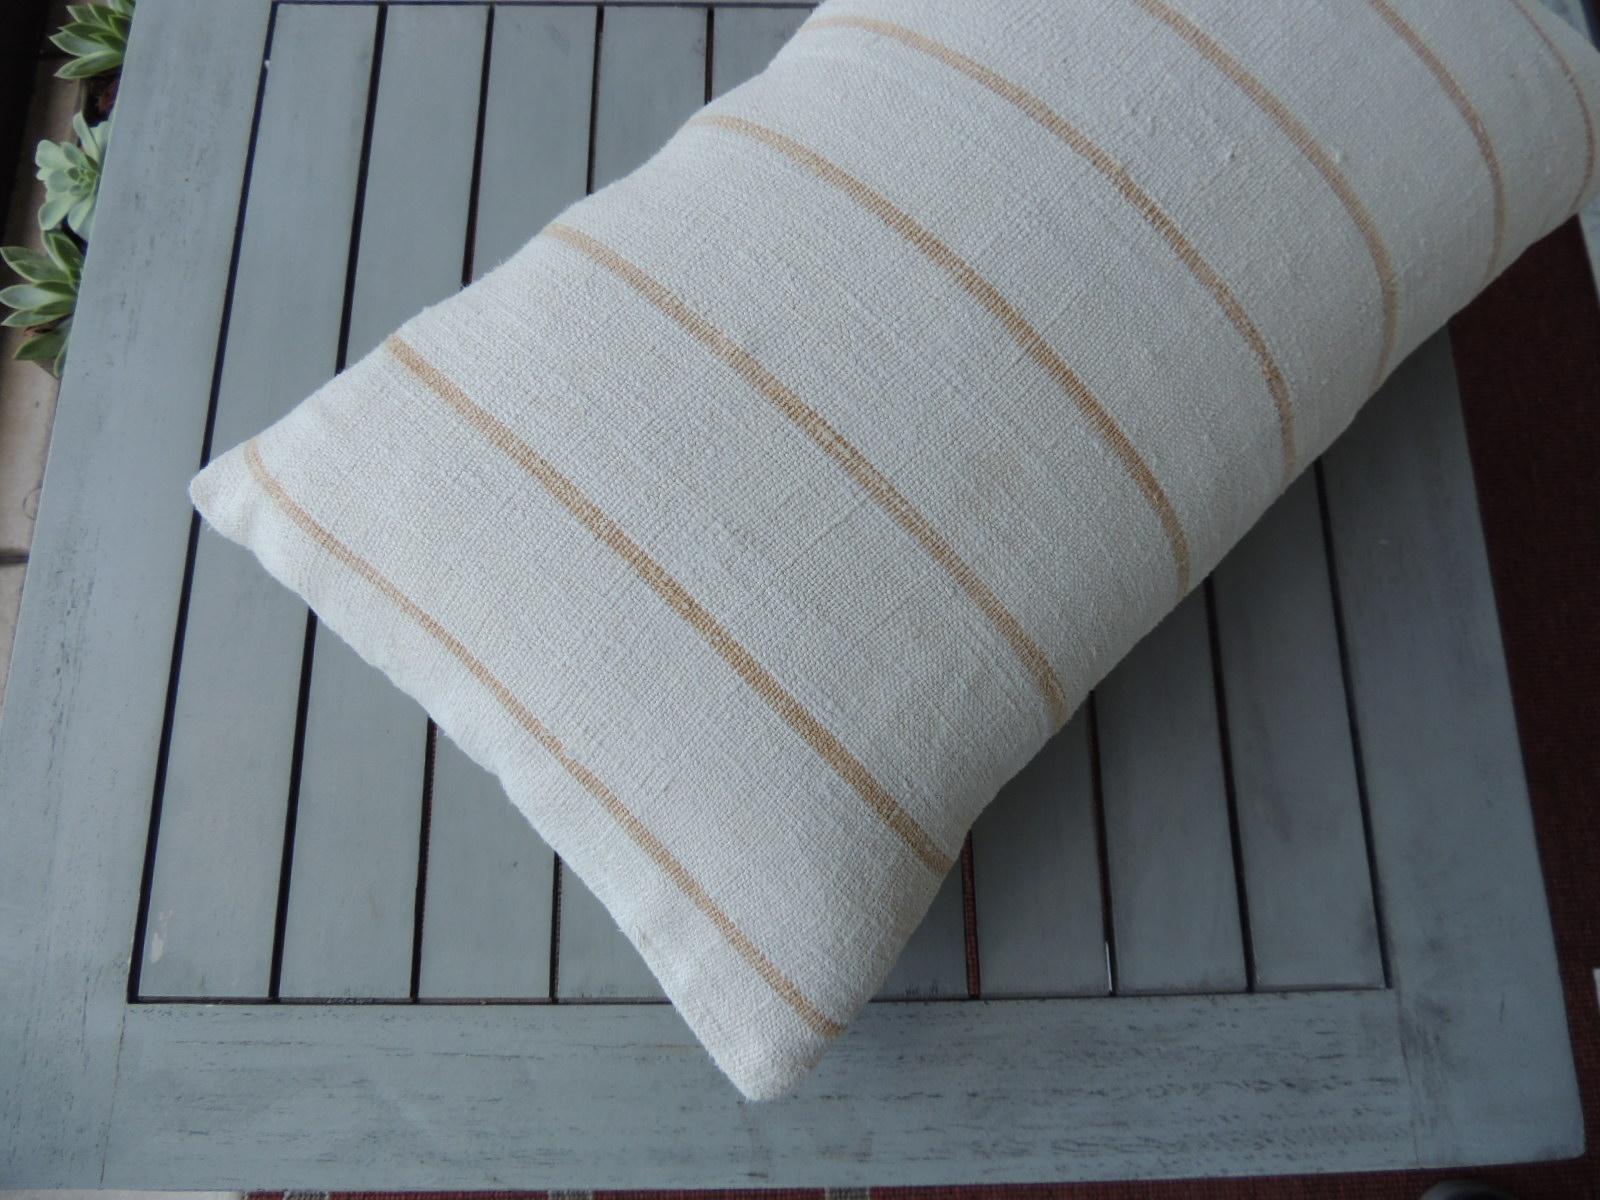 Vintage soft yellow stripes grain sack linen decorative lumbar pillow
with natural cotton backing.
Decorative pillow handcrafted and designed in the USA. 
Closure by stitch (no zipper closure) with custom made pillow insert.
Size: 11